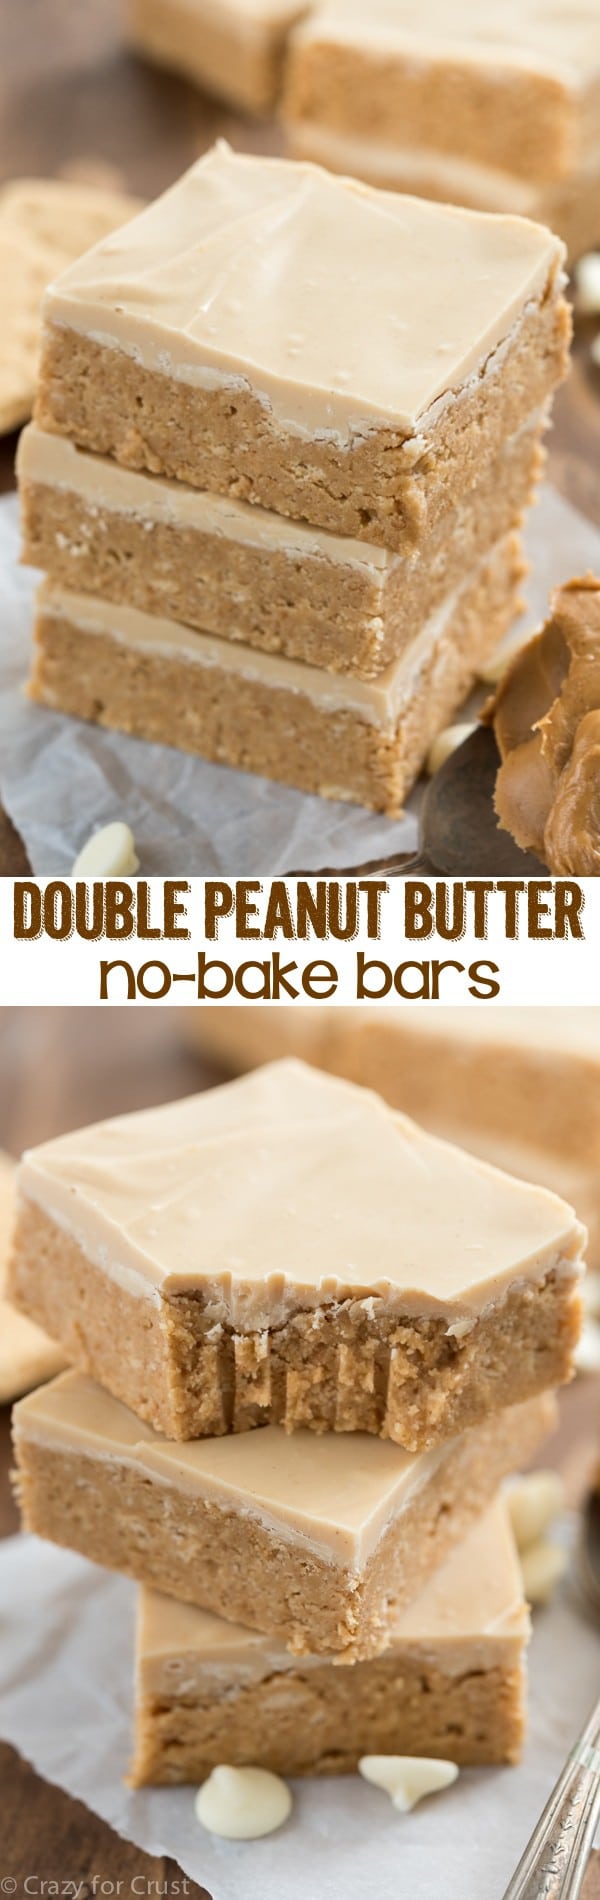 Like the inside of a peanut butter cup, these EASY Double Peanut Butter Bars are no-bake and come together in minutes. Topped with peanut butter white chocolate these bars are a super peanut buttery recipe!